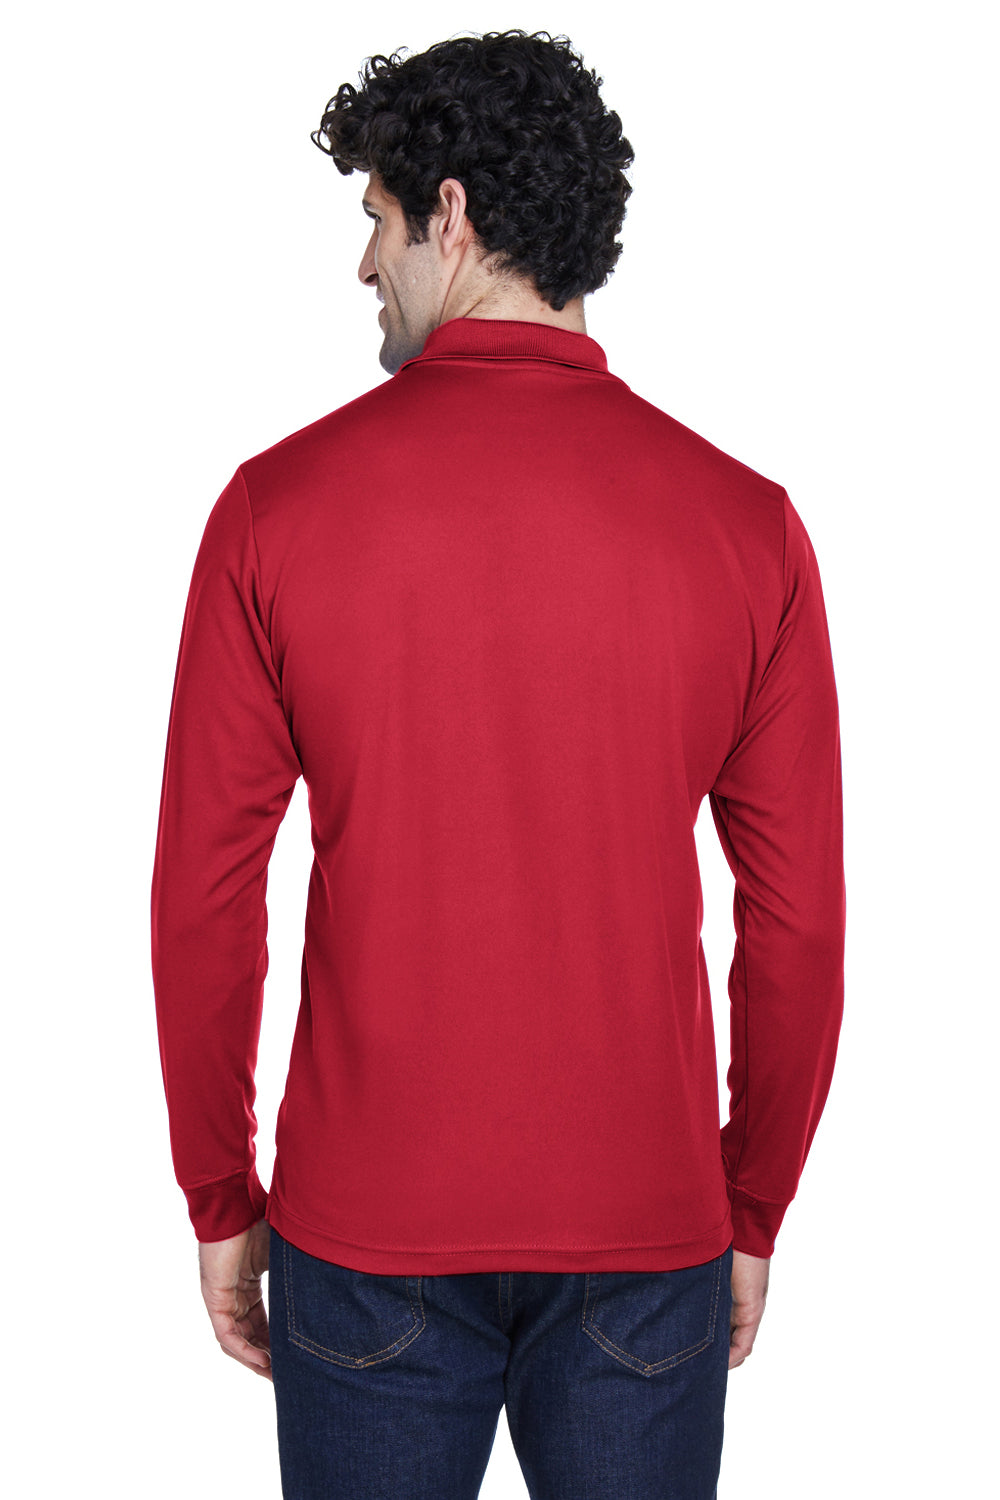 Core 365 88192 Mens Pinnacle Performance Moisture Wicking Long Sleeve Polo Shirt Red Back